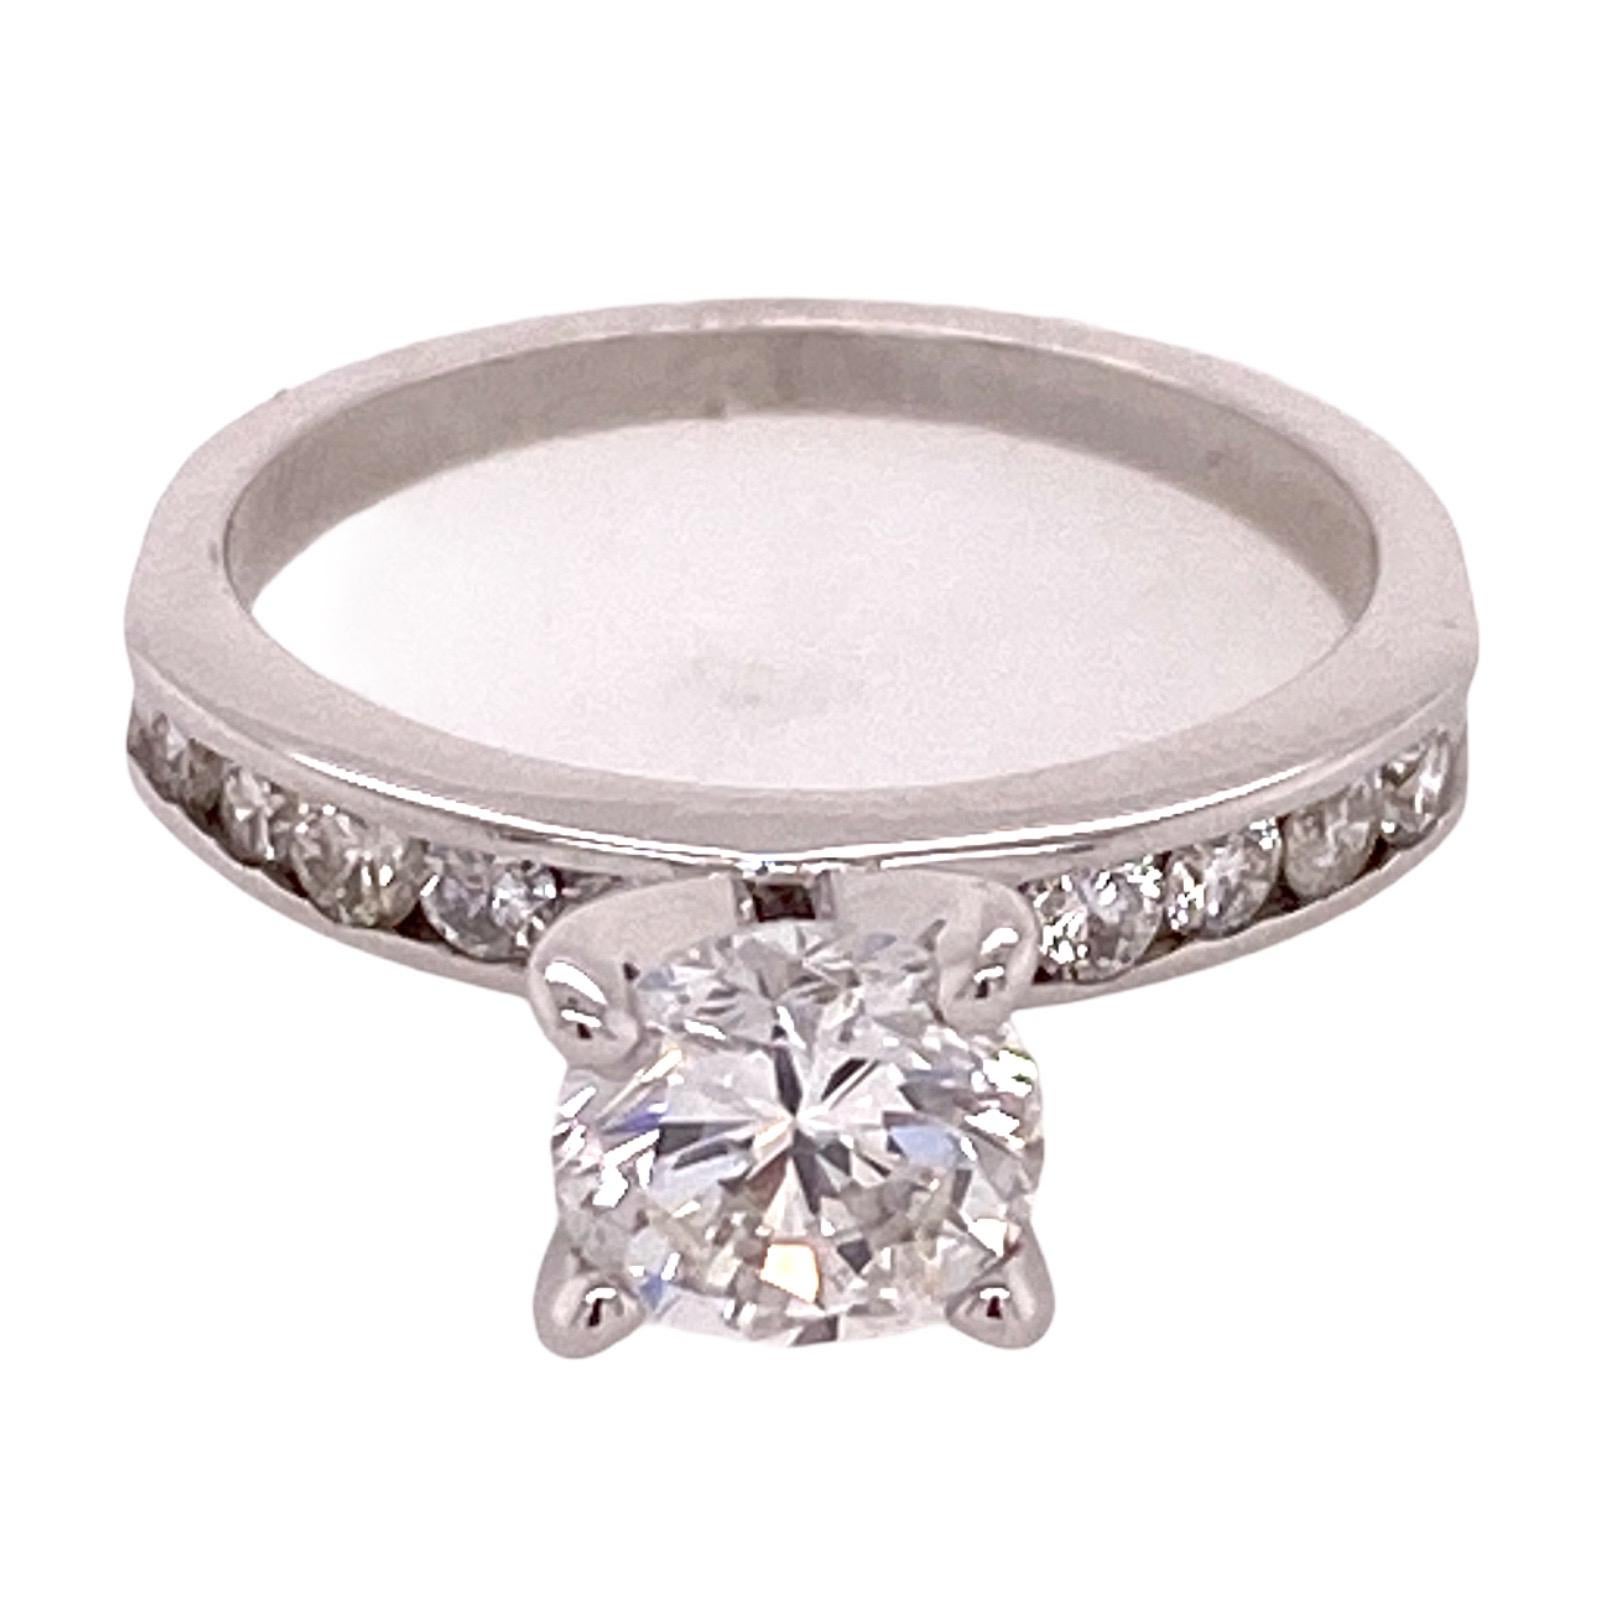 how much does a 1.08 carat diamond ring cost